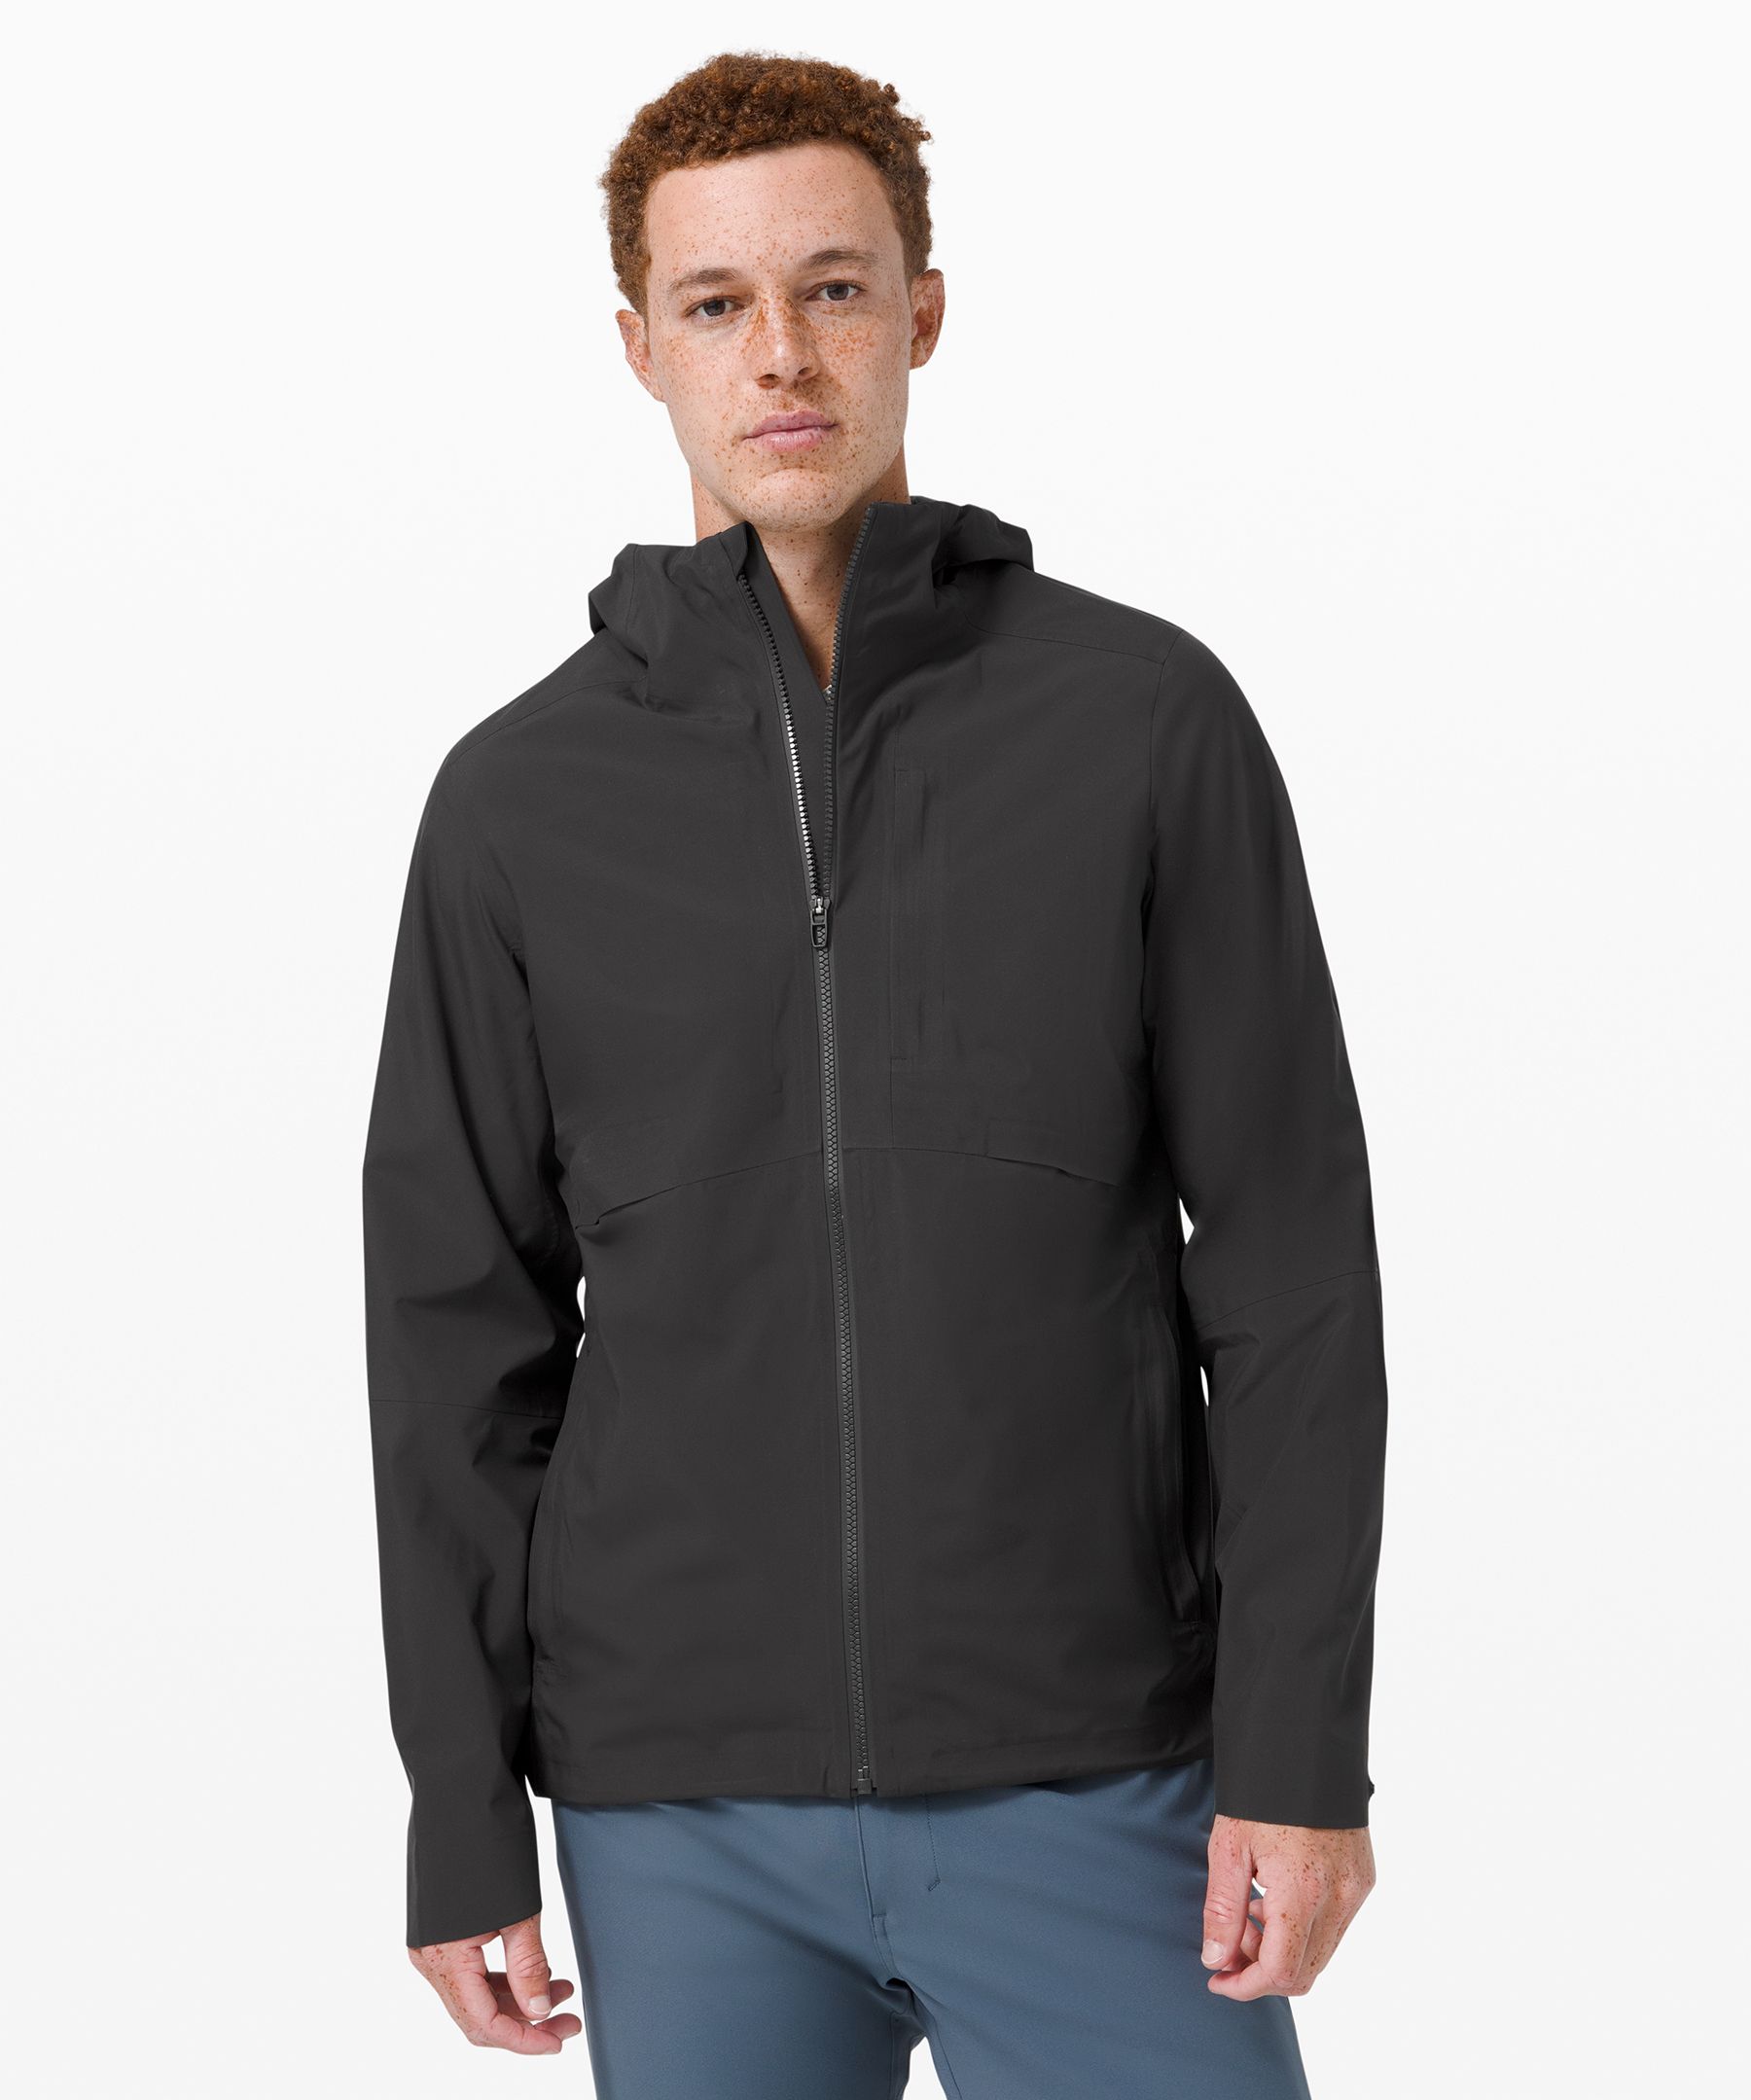 Outpour Shell Jacket | Men's Jackets + 